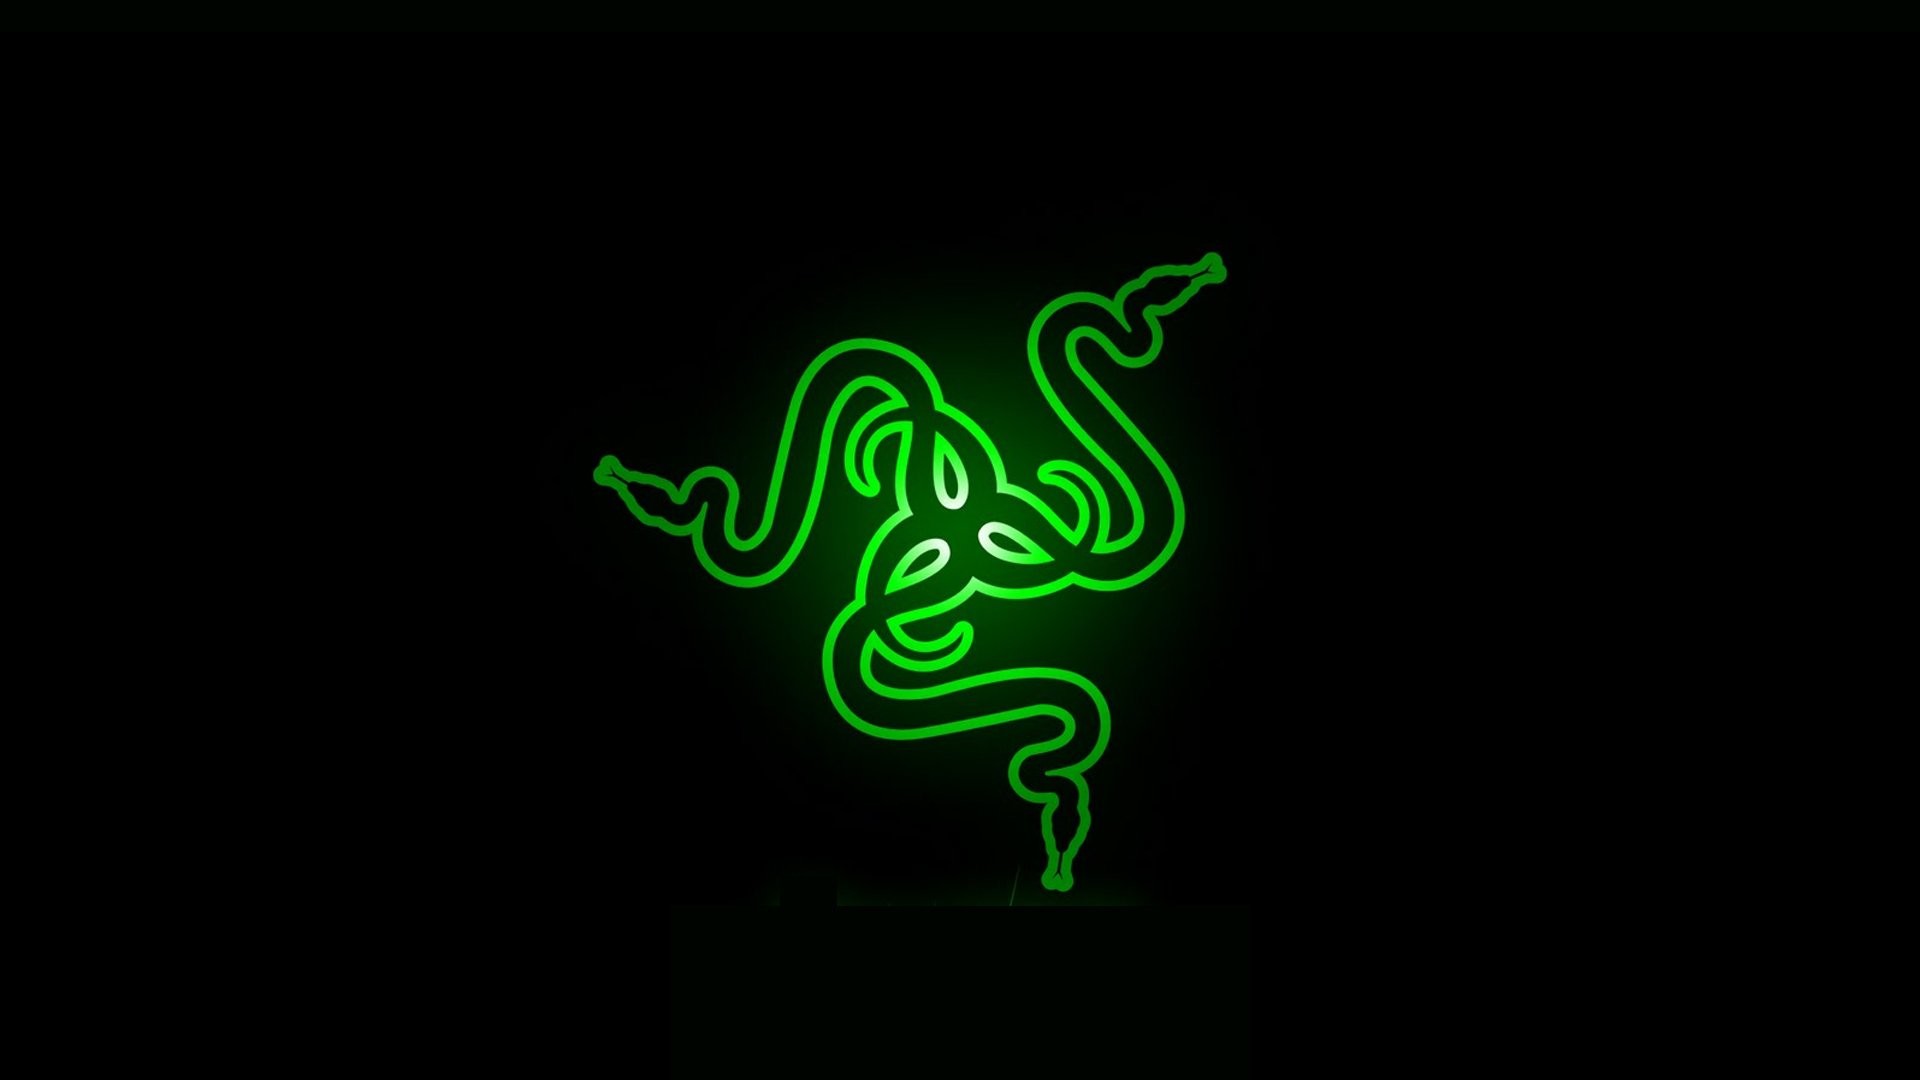 1920x1080 9 best images about <b>Razer</b> Gaming on Pinterest |